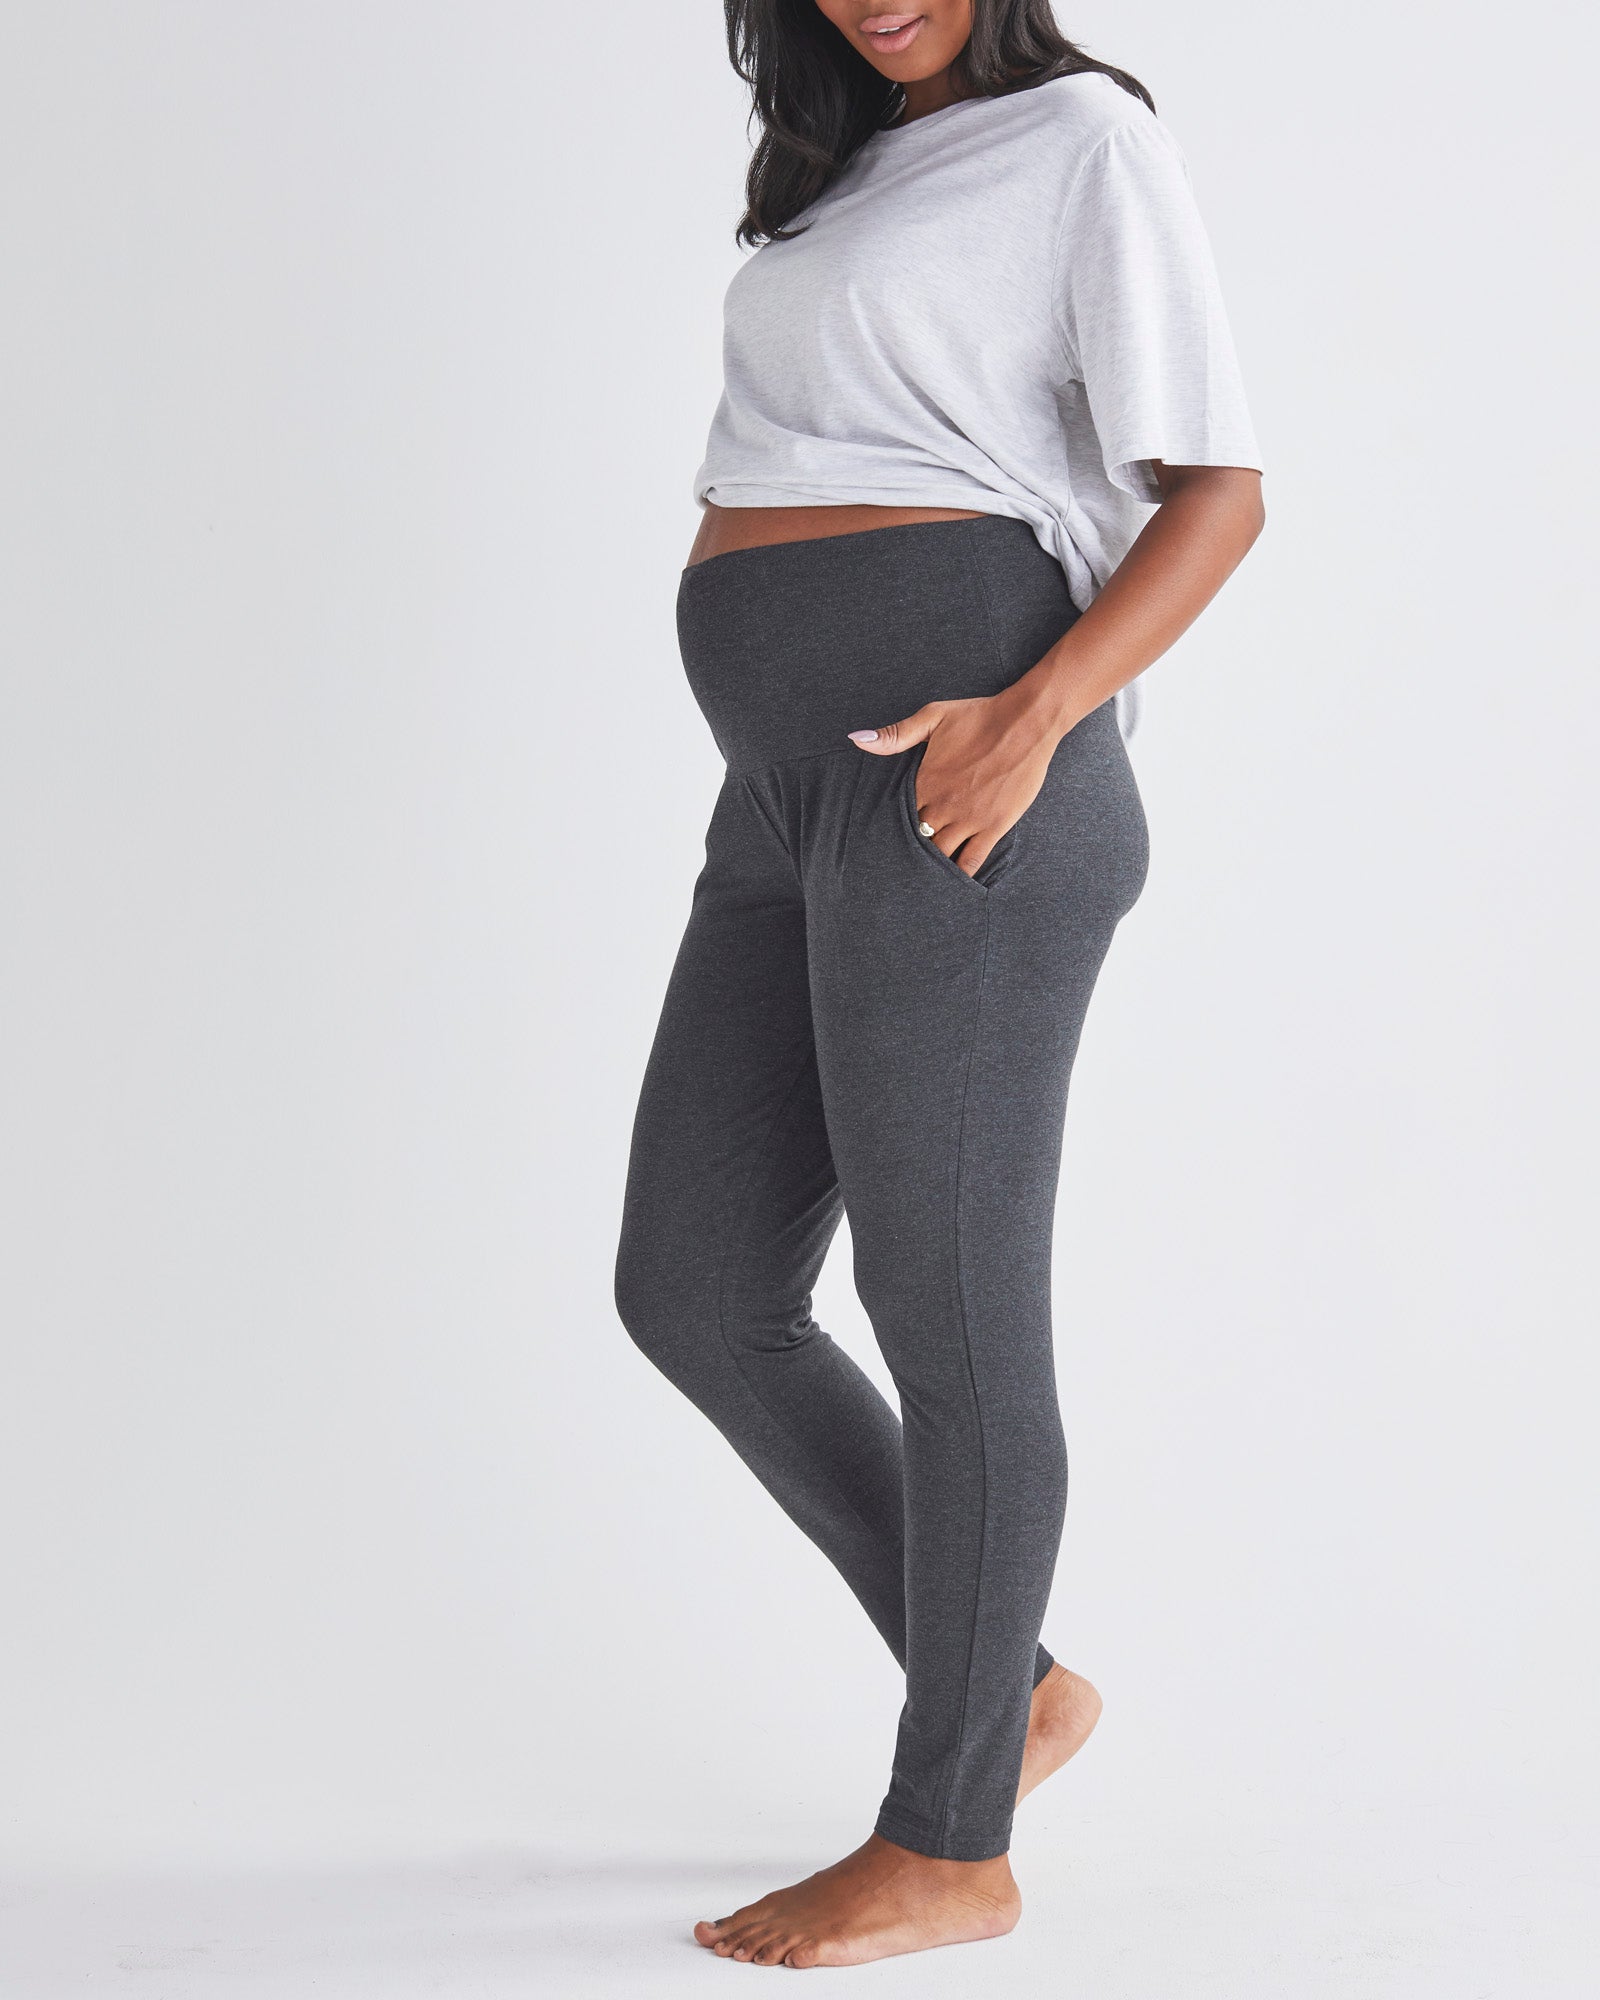 Maternity Pants Australia: Discover Comfort, Style & Support